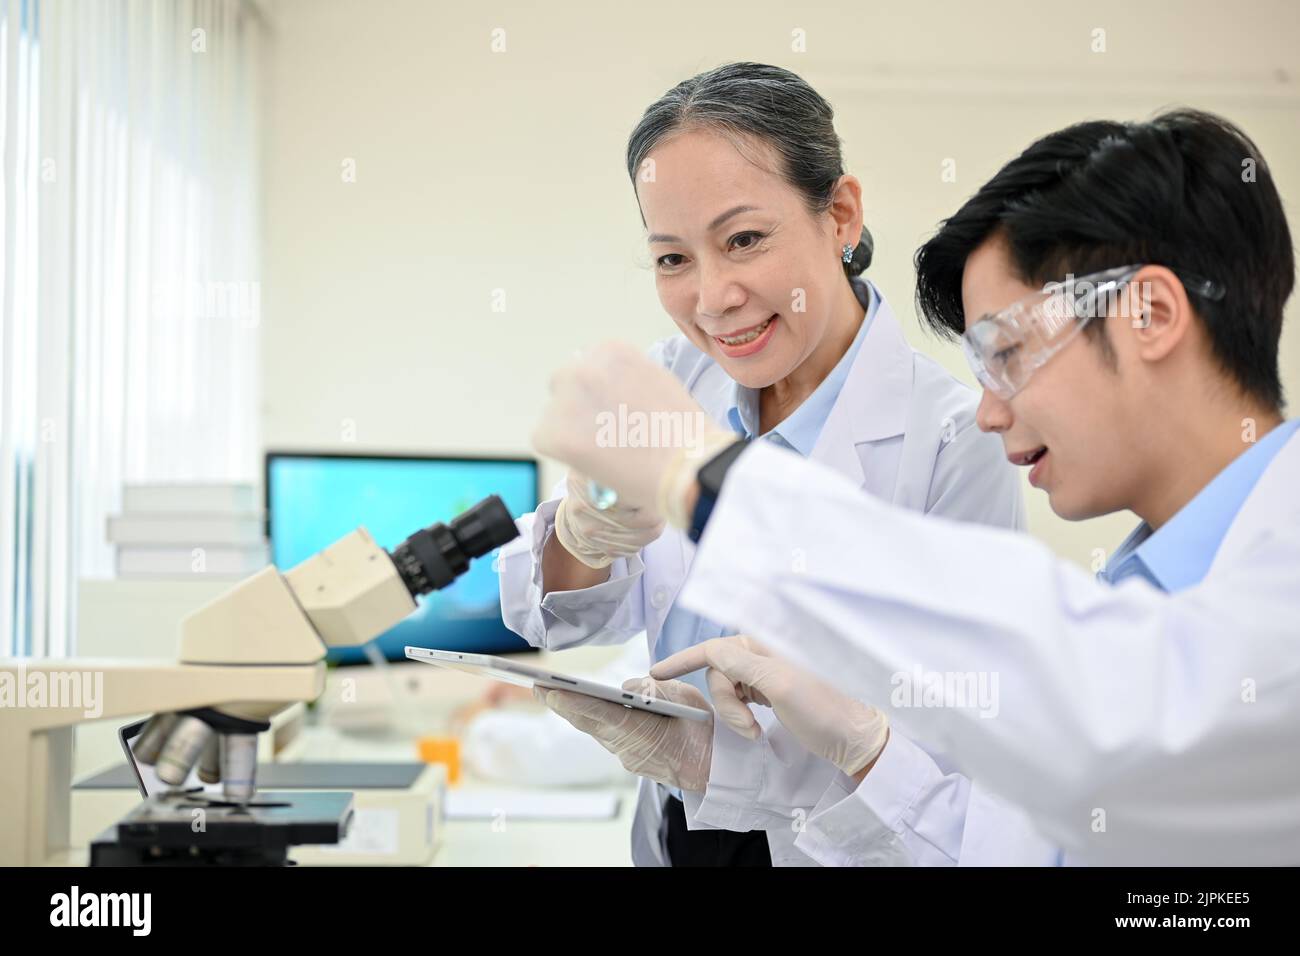 A talented young Asian male medical specialist or scientist working in the lab with senior female supervisor. Stock Photo